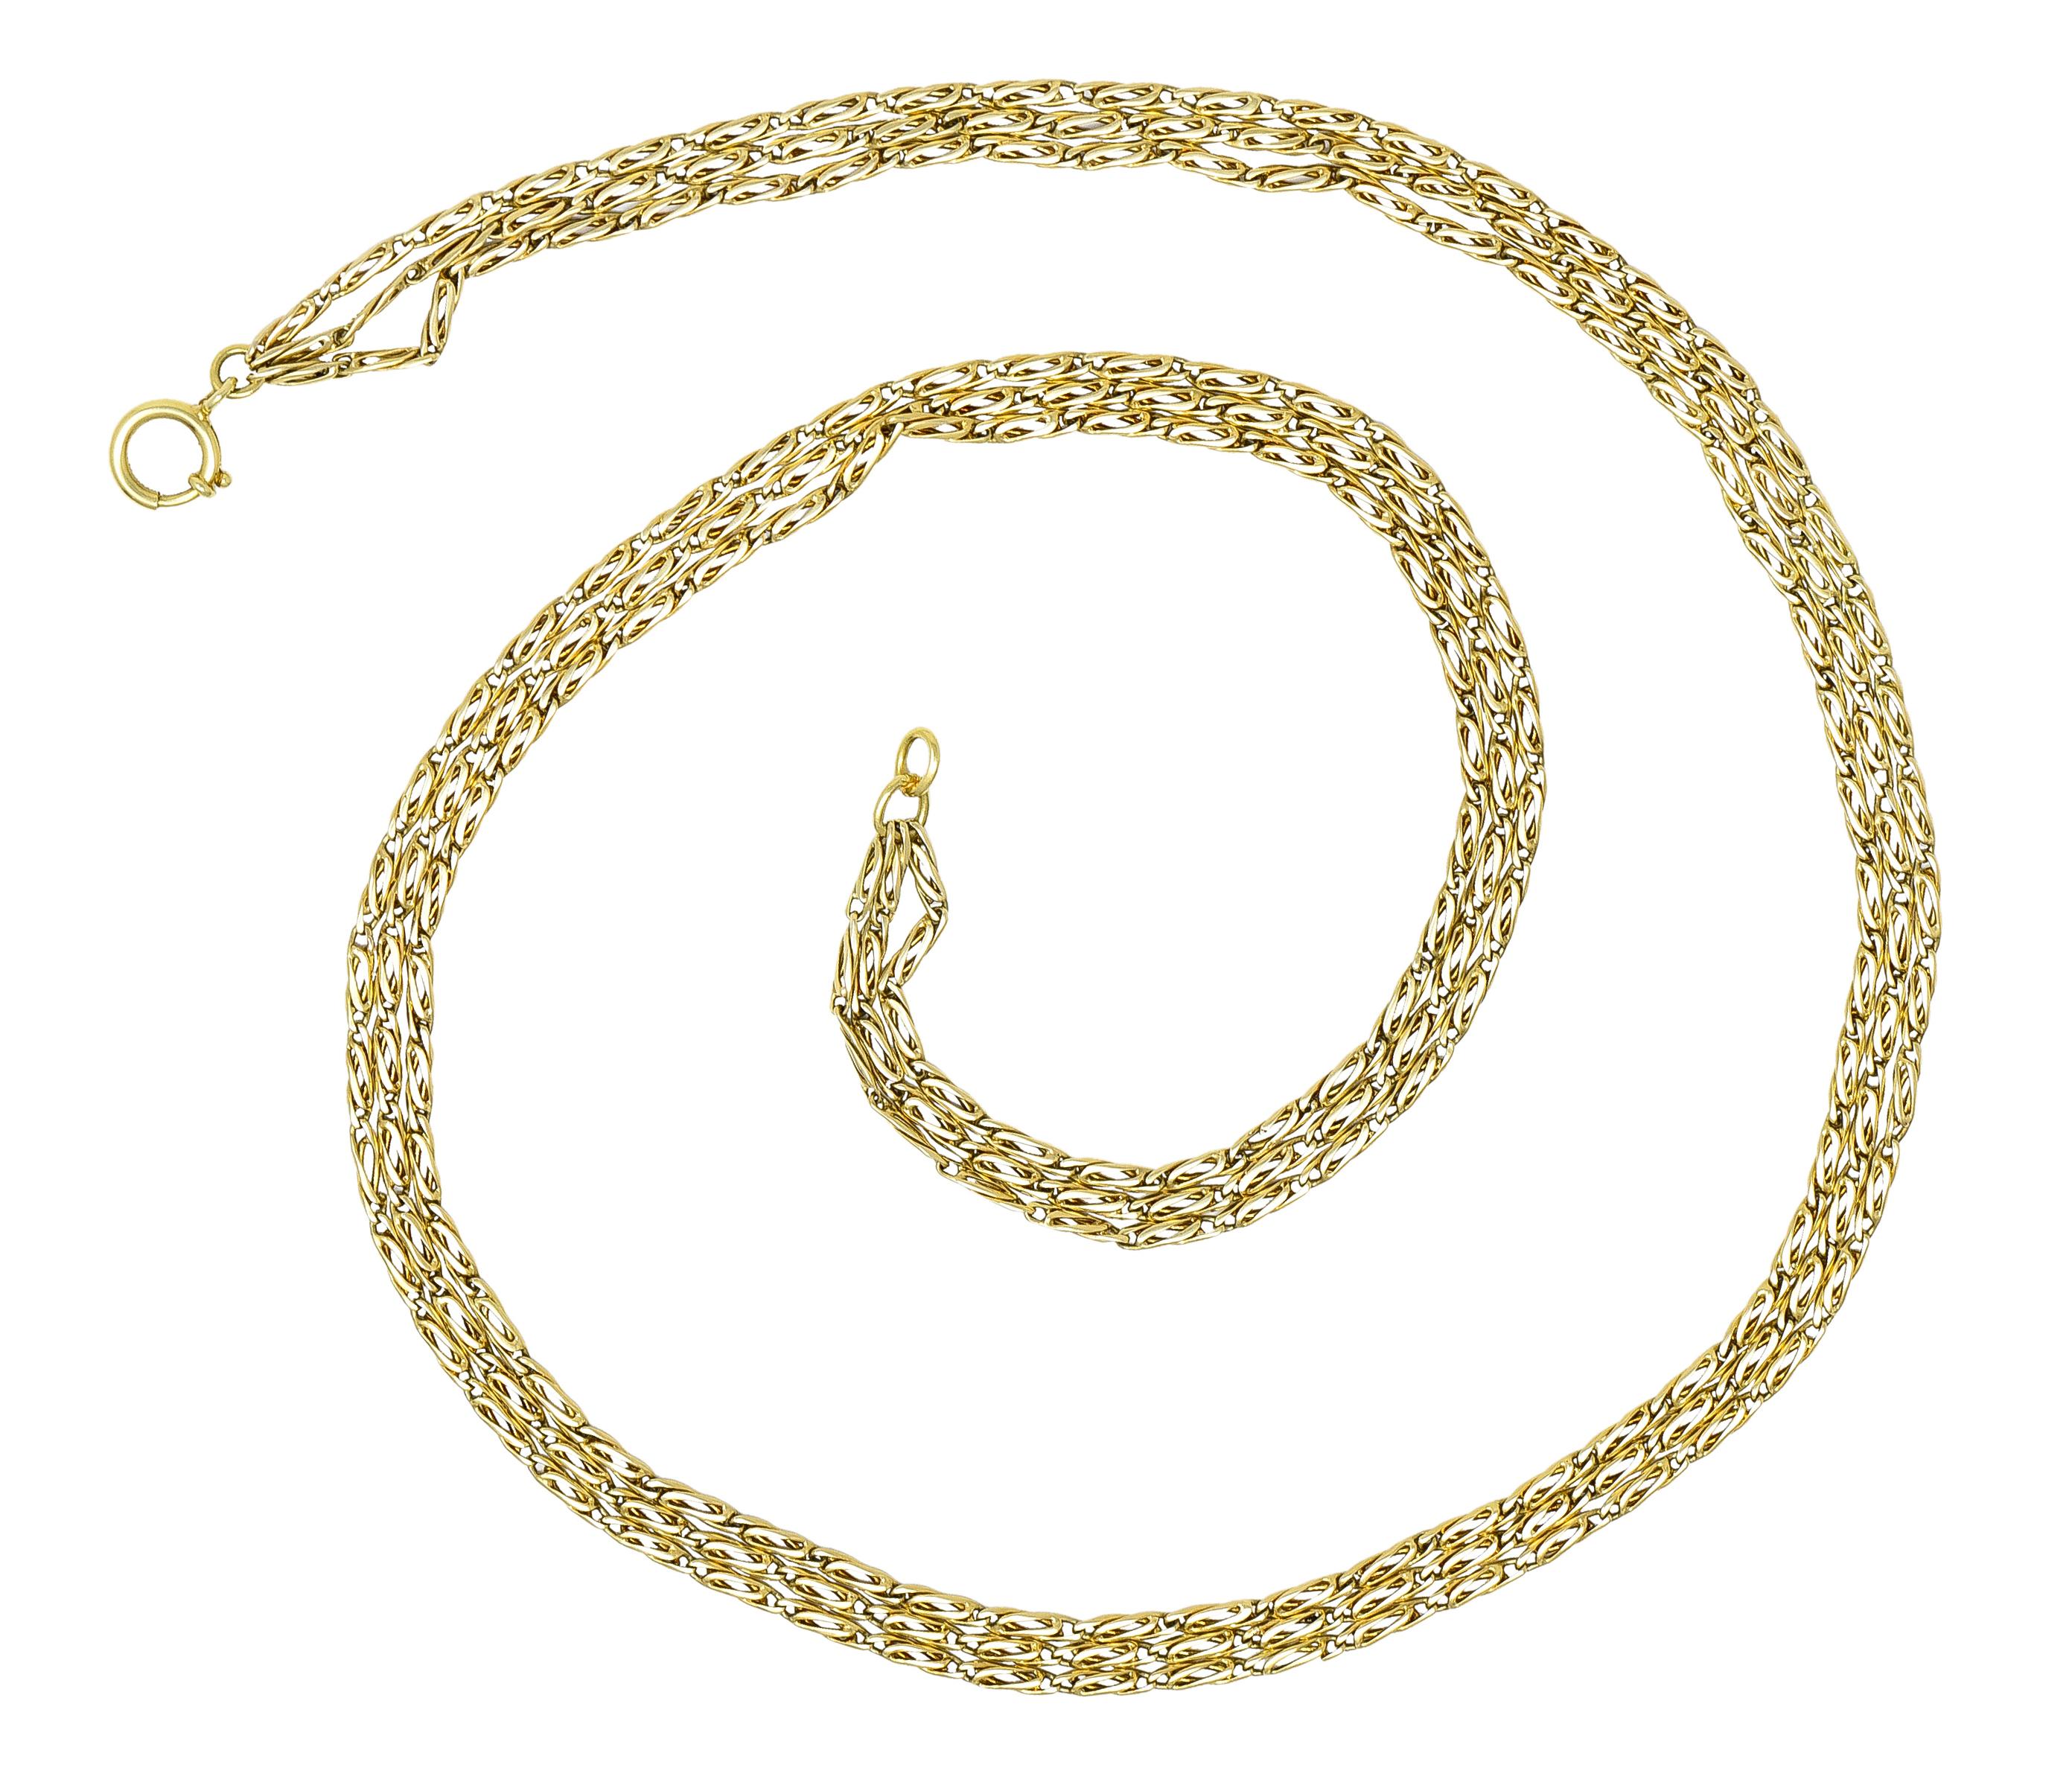 Designed as three strands of scroll link chain. Featuring a high polish finish. Completed by large spring clasp closure. Stamped 750 for 18 karat gold. With maker's mark. Circa: 1980's. Width at widest: 1/4 inch. Total length: 24 inches. Total